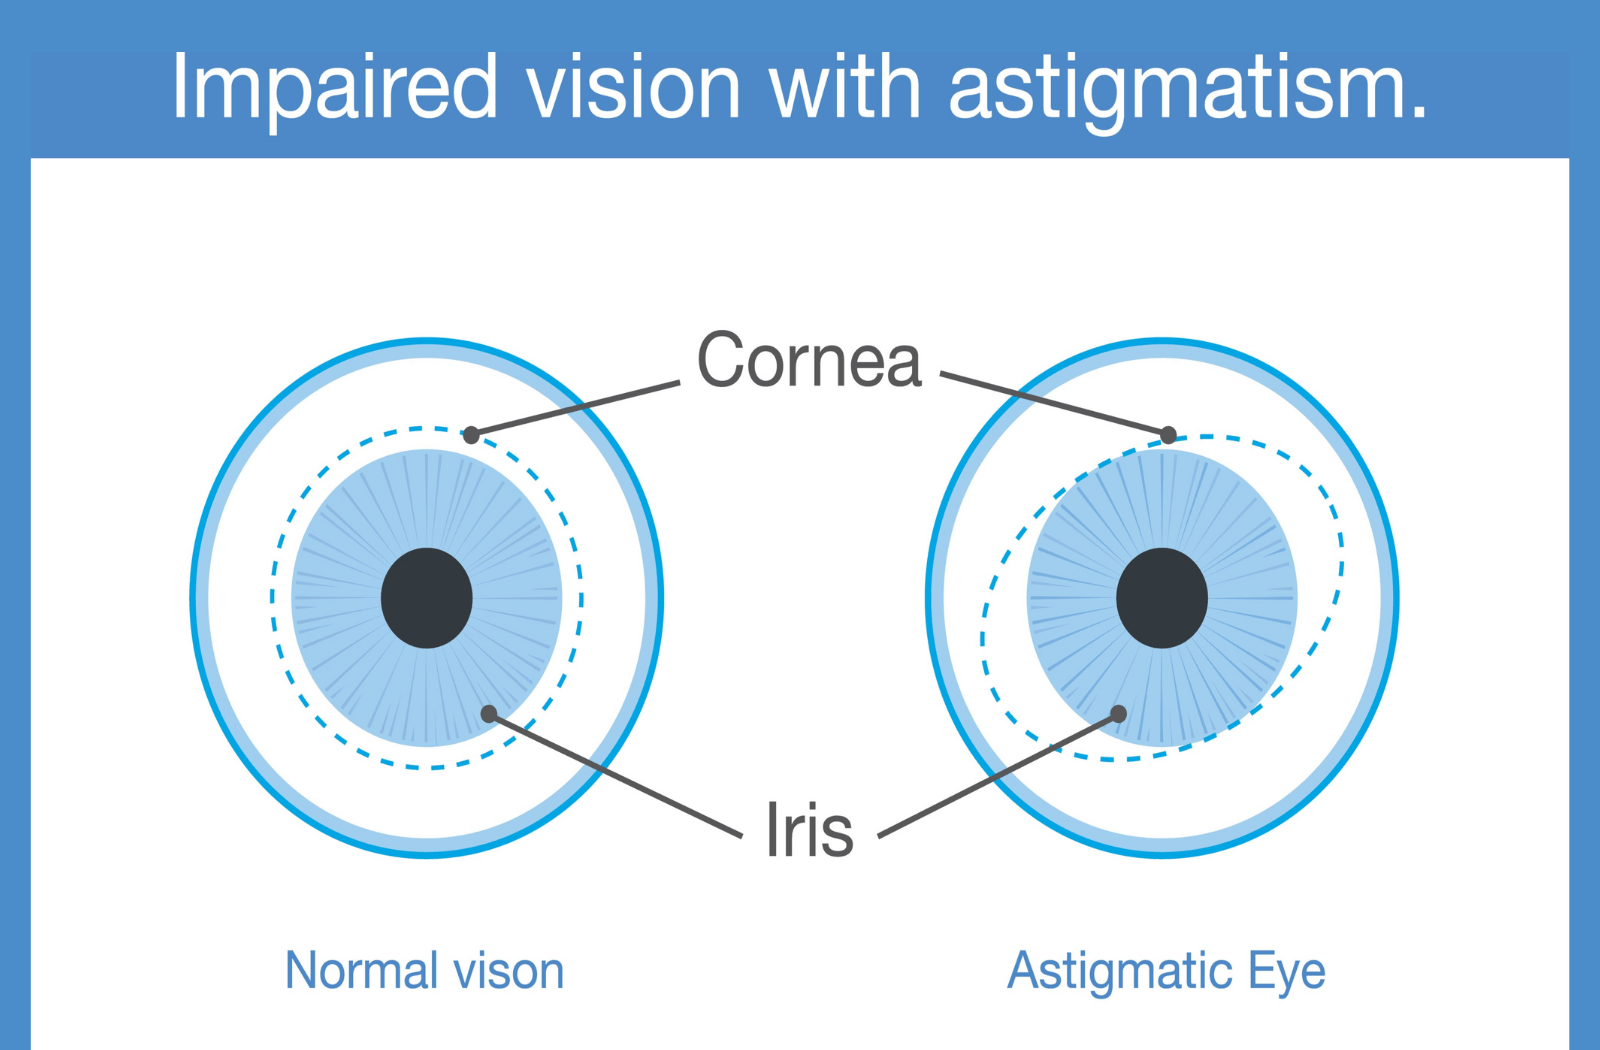 A graphic comparing a healthy eye's cornea and iris, compared to what an astigmatic eye looks like